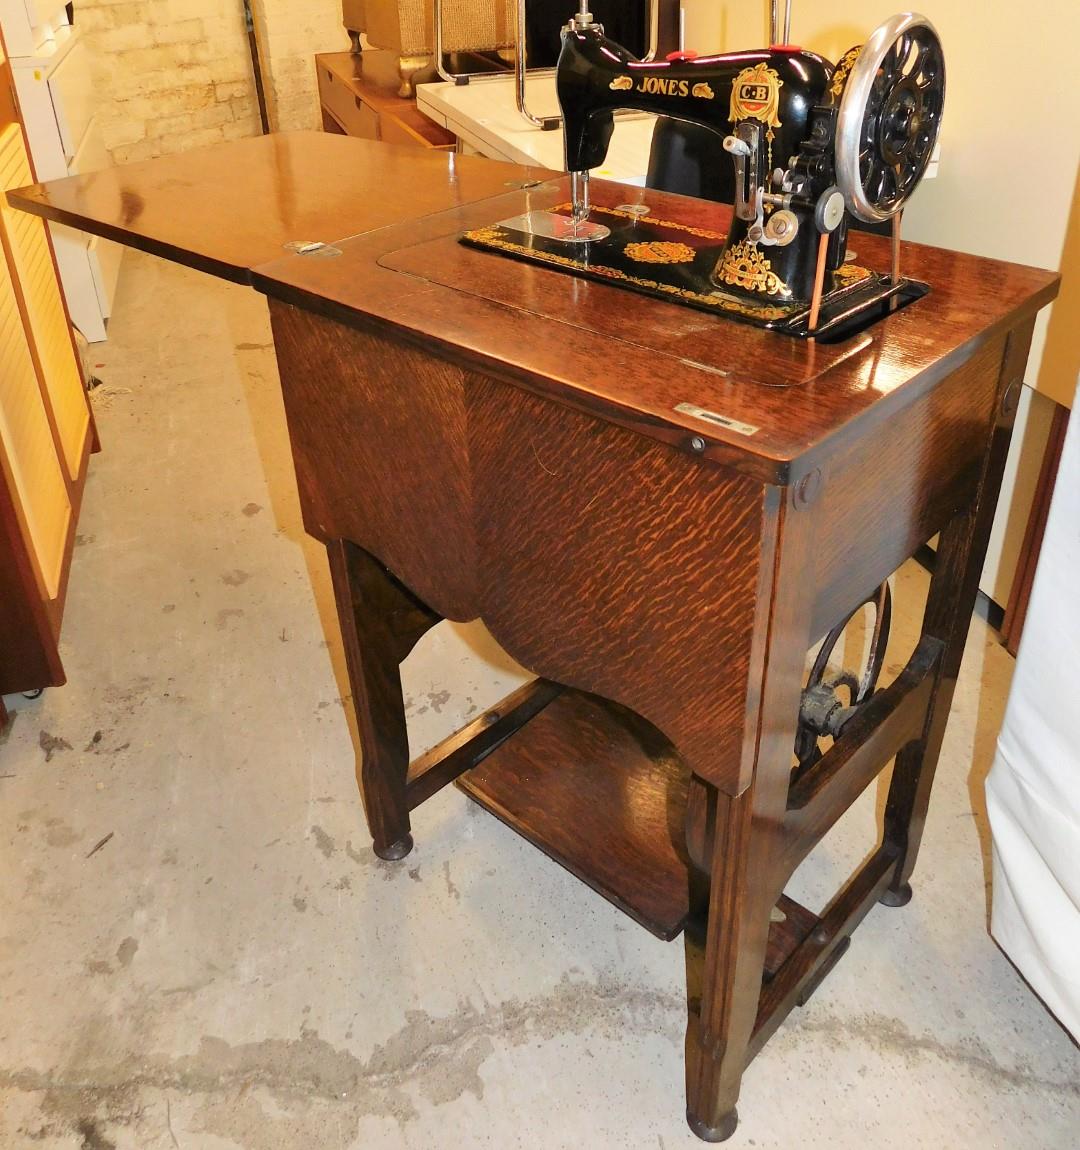 A Jones sewing machine in oak stand, enclosed in a mahogany tailors work stand, with compartment